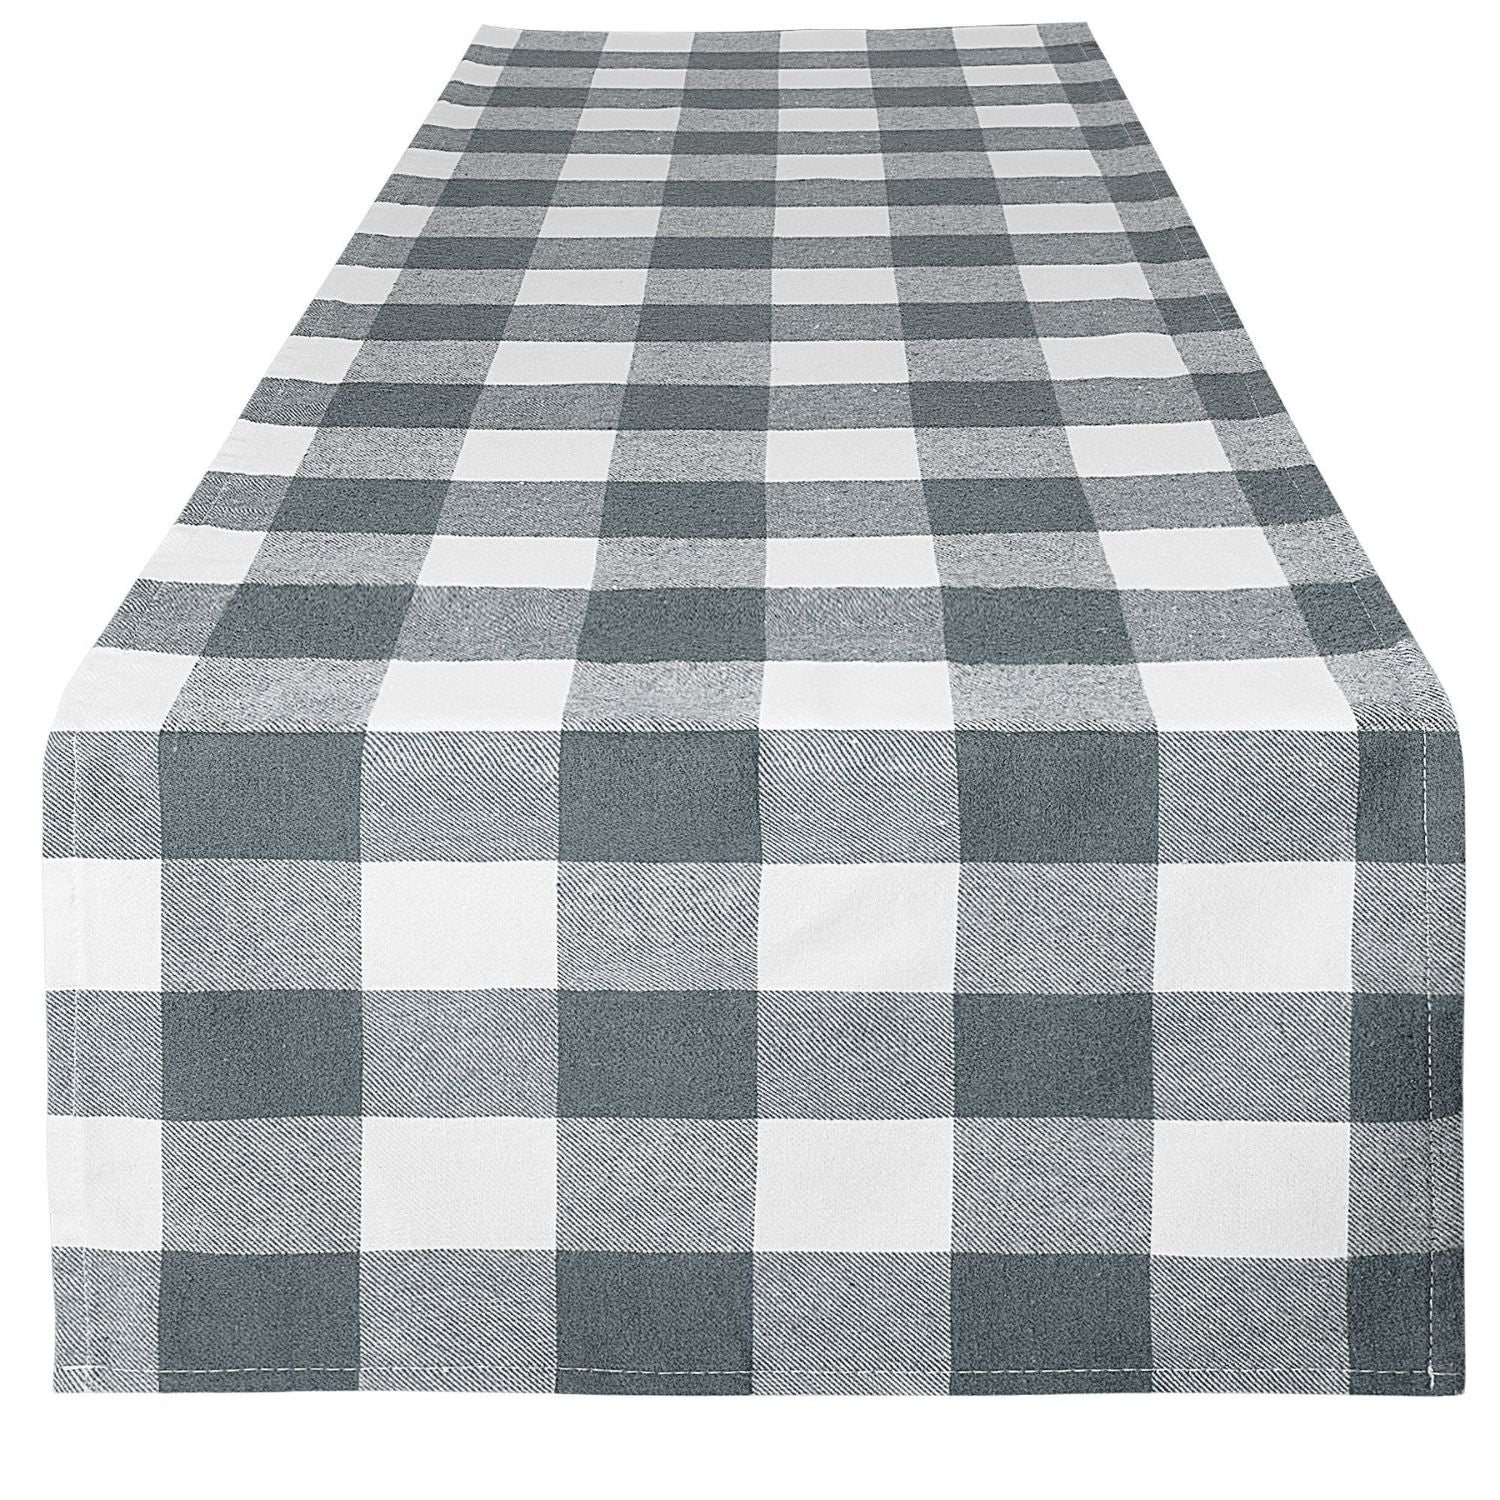 Zulay Home Table Runner